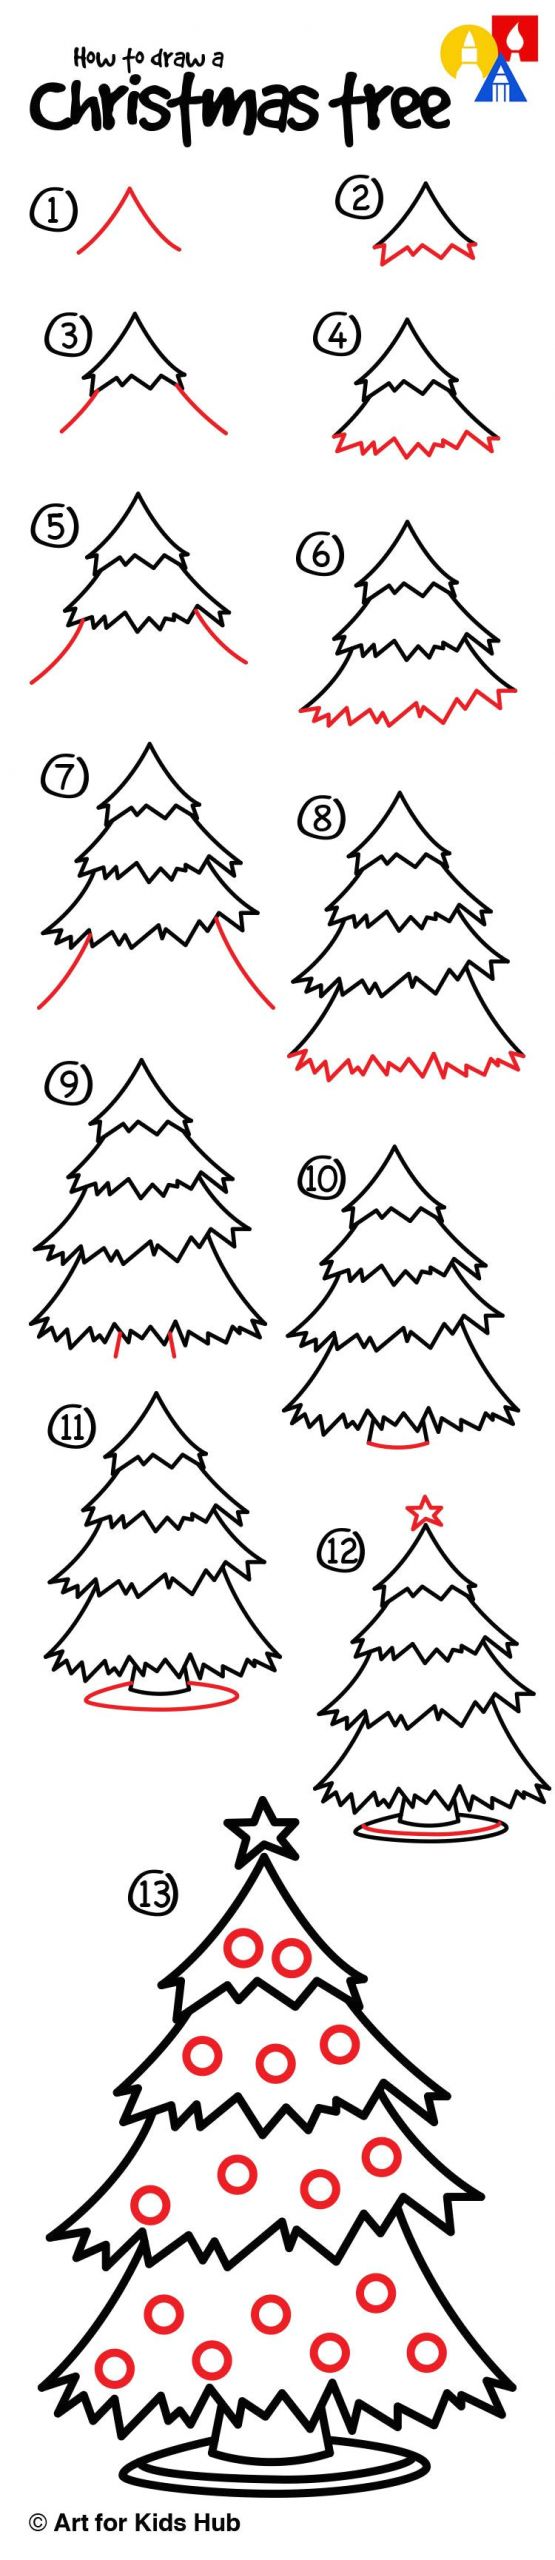 Easy Things to Draw for Christmas How to Draw A Christmas Tree Art for Kids Hub Art for